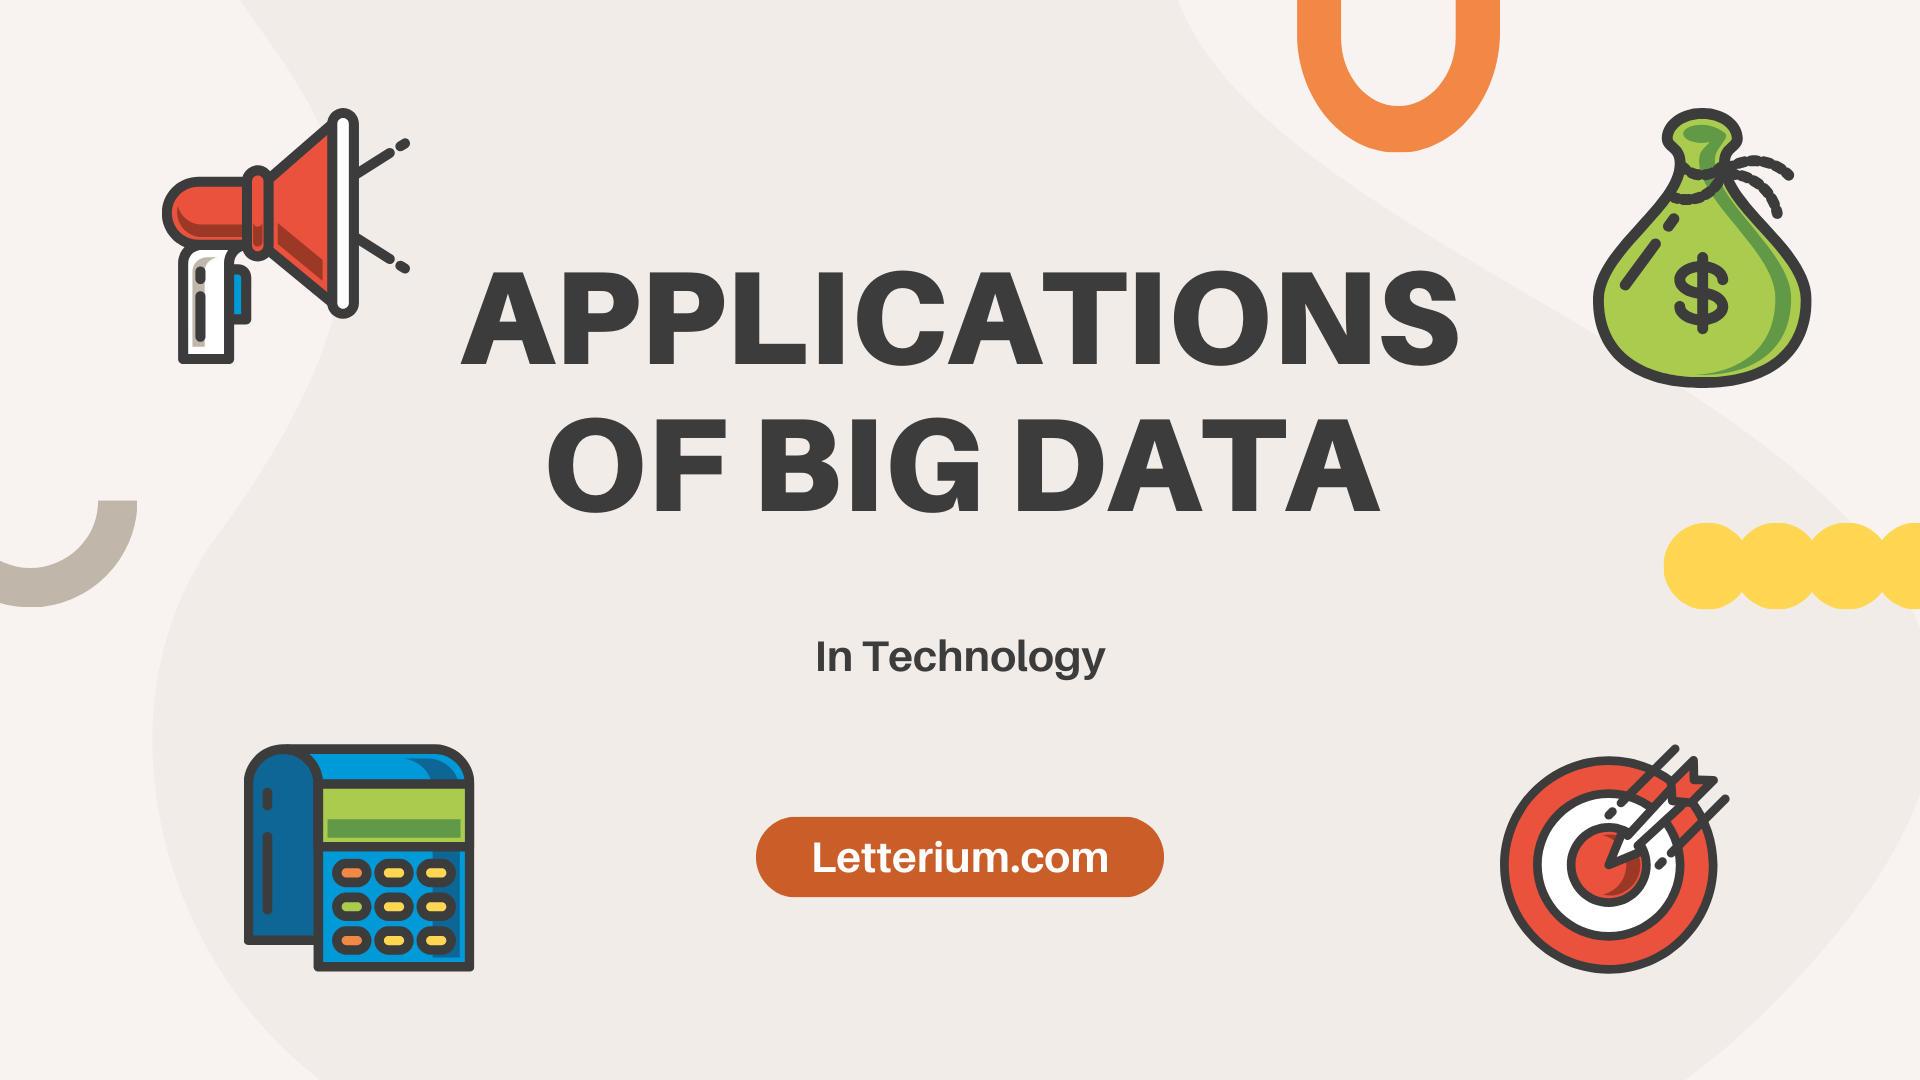 Applications of Big Data in Technology